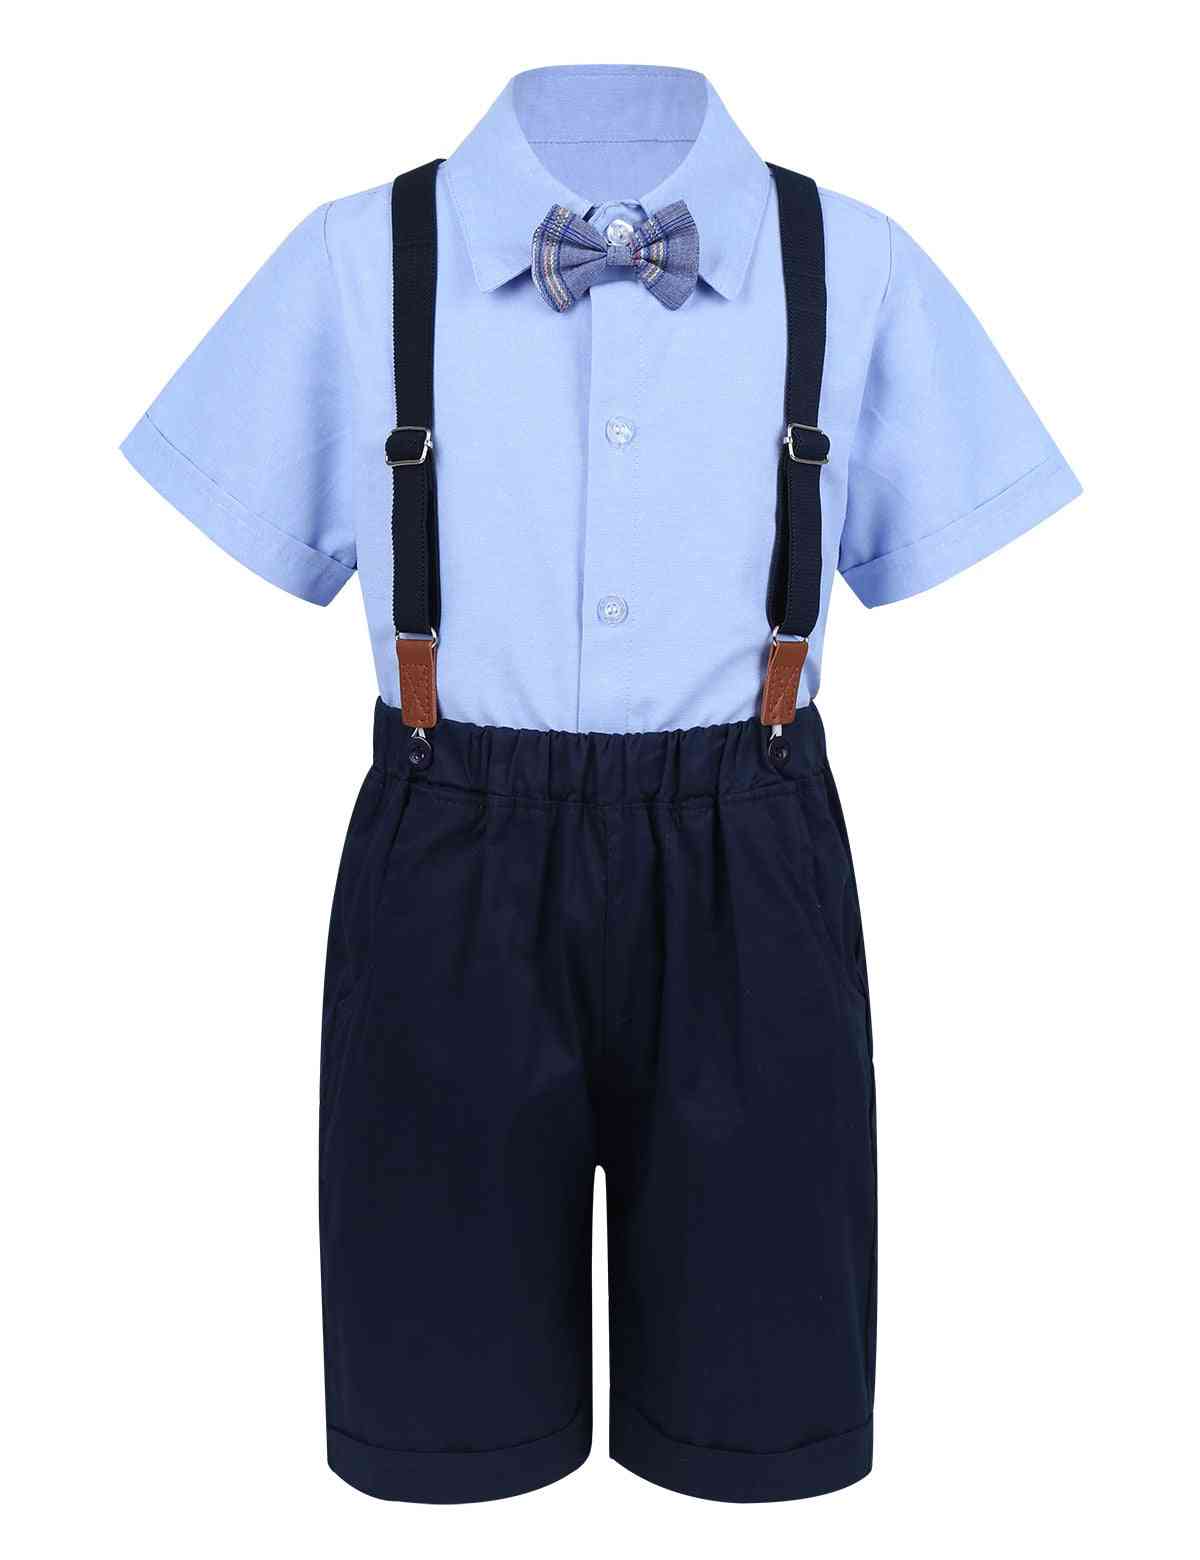 4pcs Infant Baby Gentleman Outfit